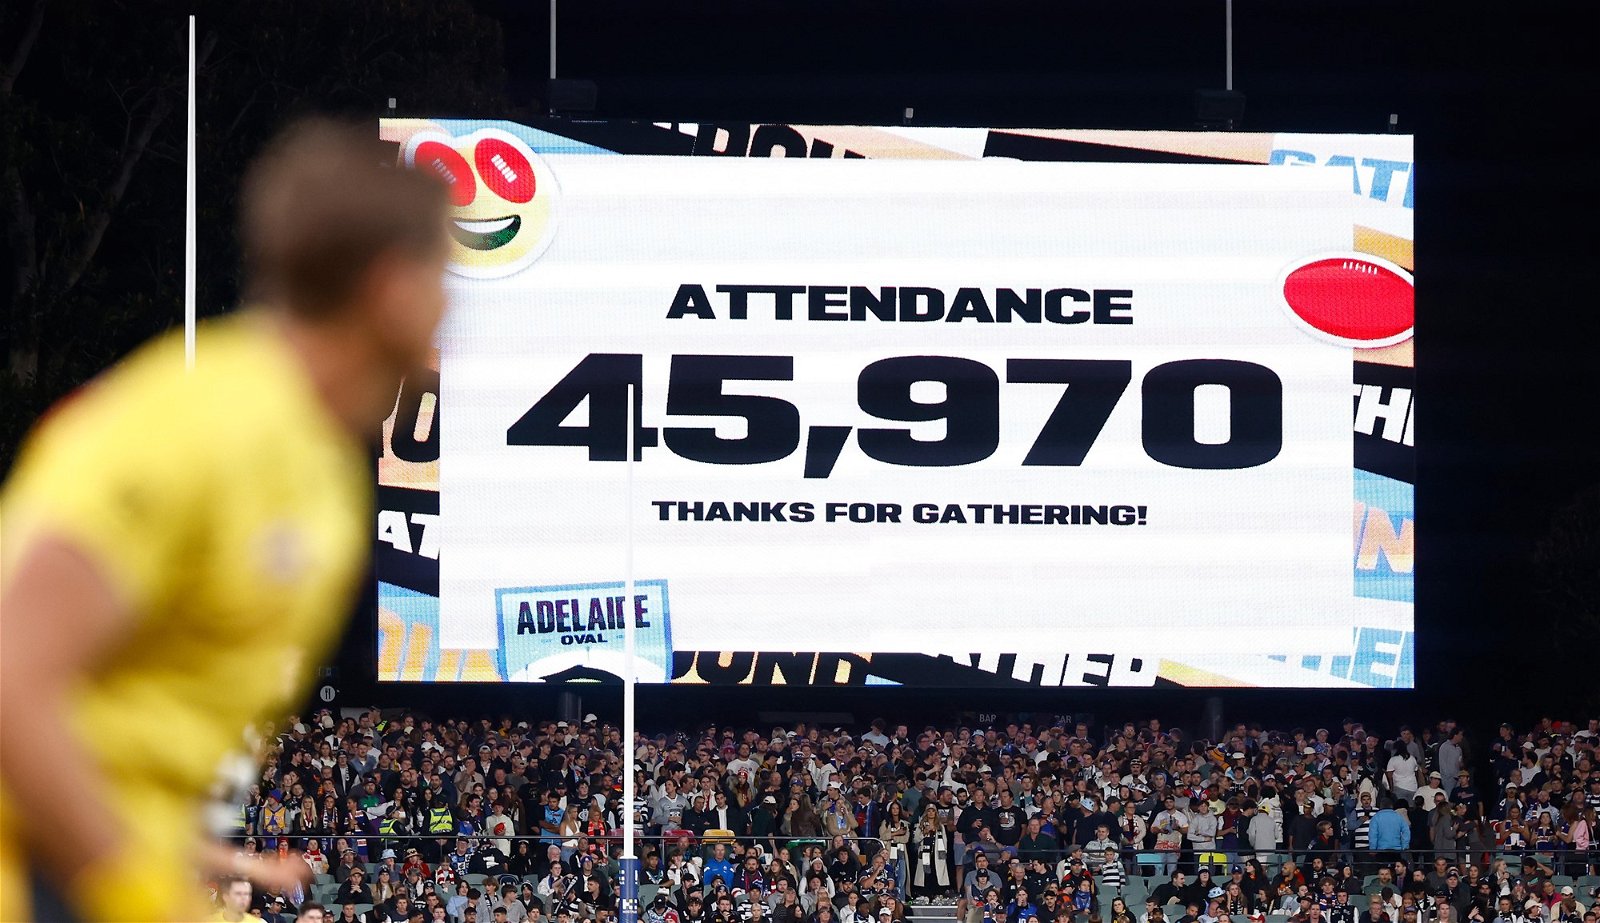 The attendance is seen on the big screen at Adelaide Oval.